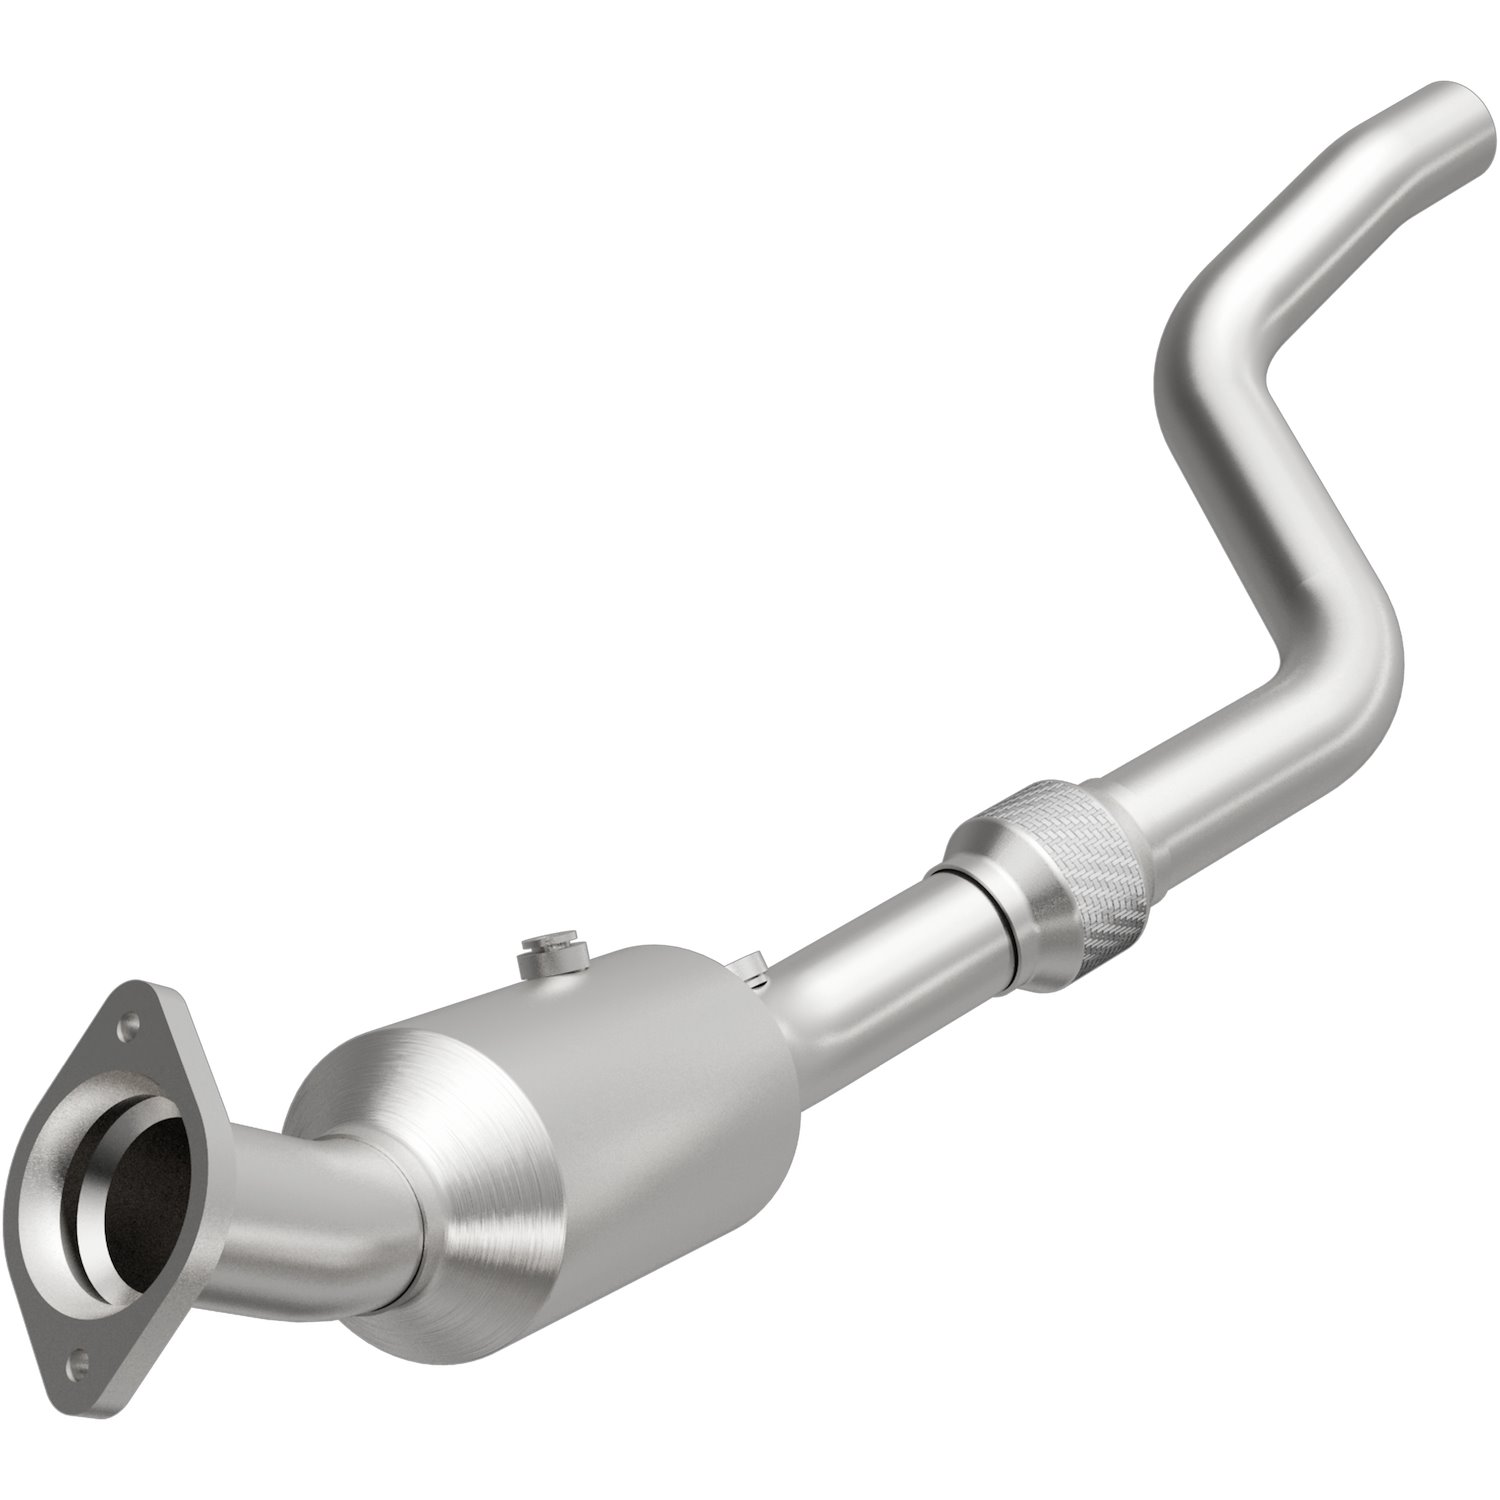 California Grade CARB Compliant Direct-Fit Catalytic Converter 5461243